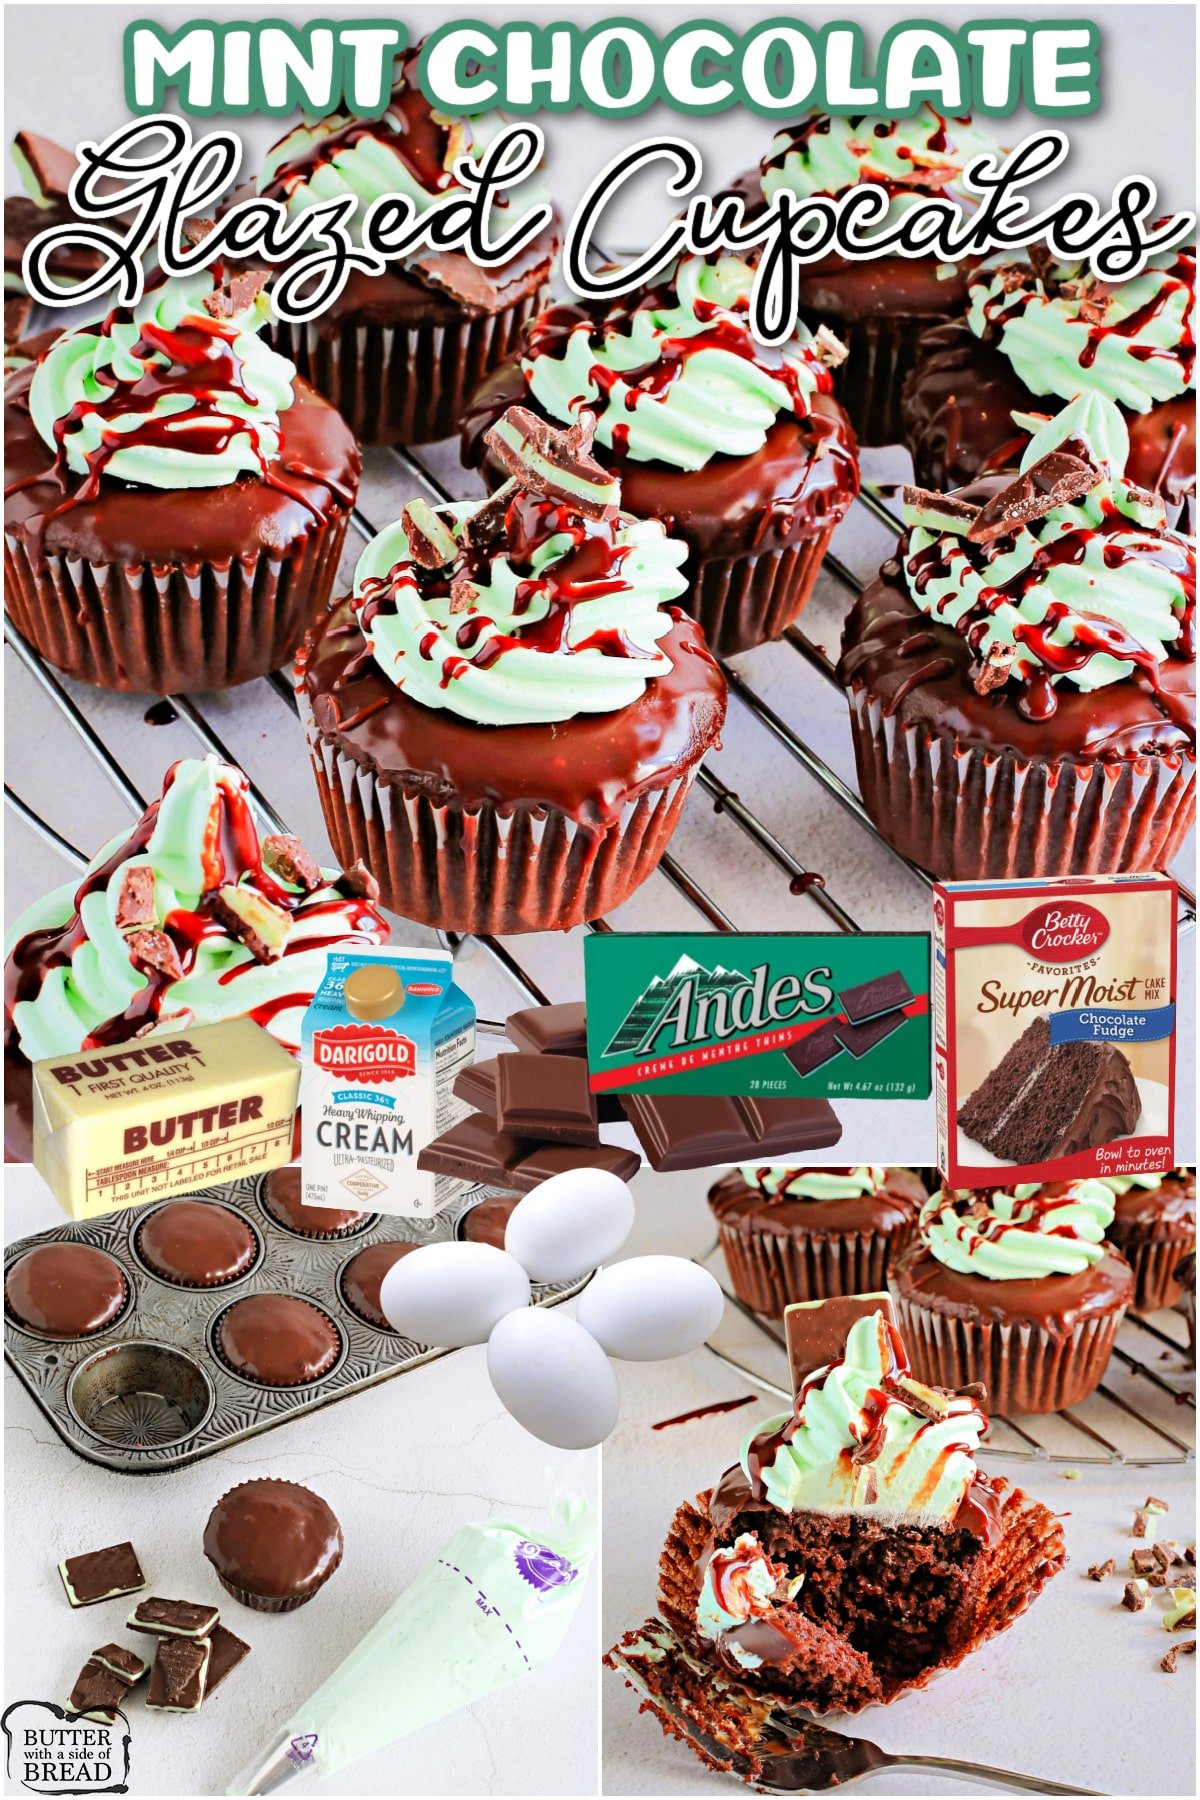 Mint Chocolate Cupcakes are made easily with our boxed cake mix hacks! These cupcakes with boxed cake mix are dipped in a chocolate glaze and topped with smooth mint buttercream.